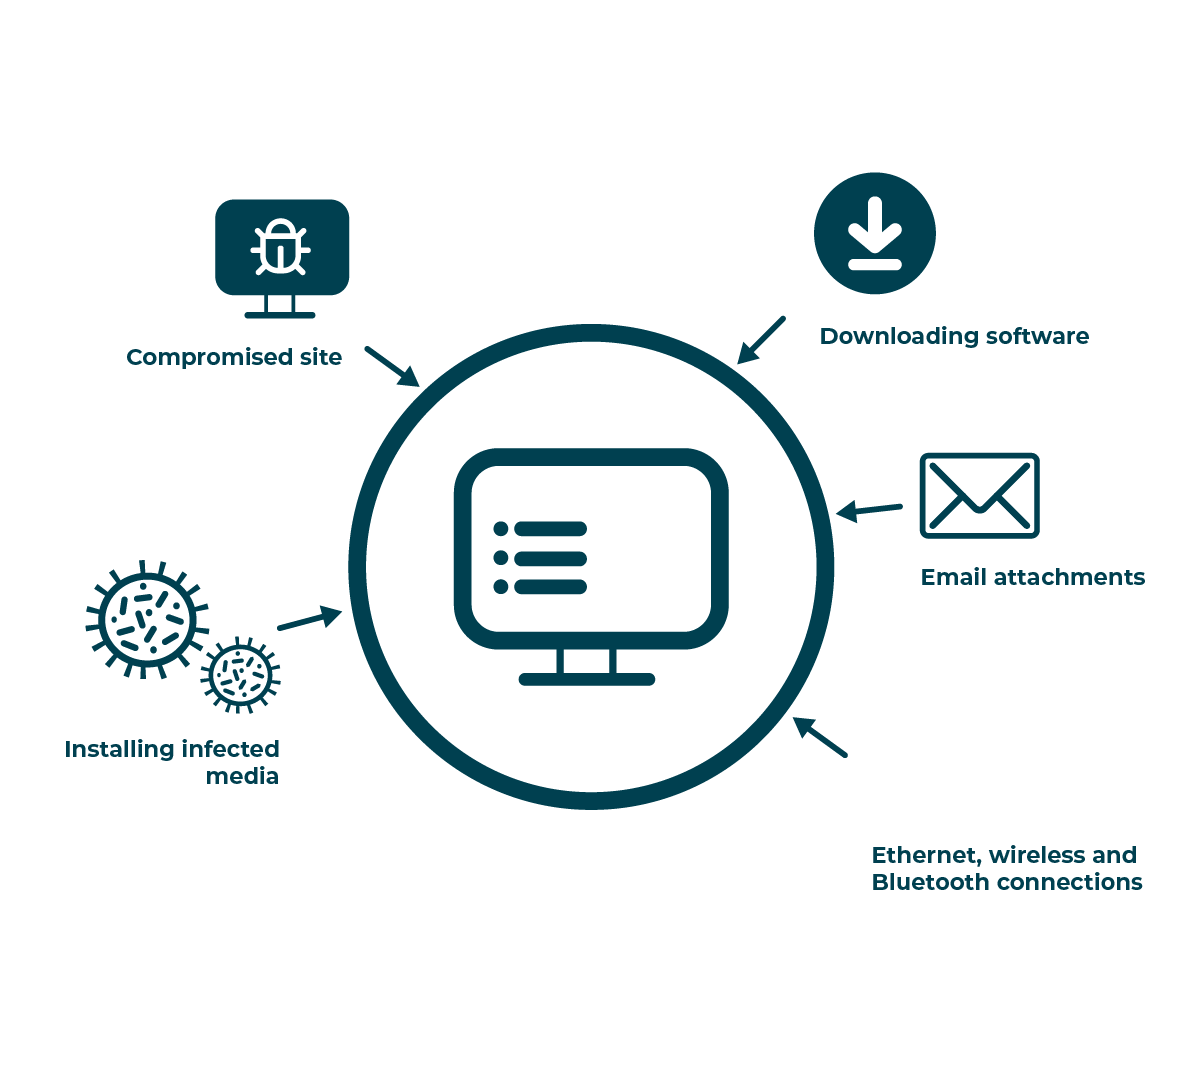 Diagram: Five types of threat vector: a Compromised site, installing infected media, downloading software, email attachments, and ethernet, wireless and Bluetooth connections.